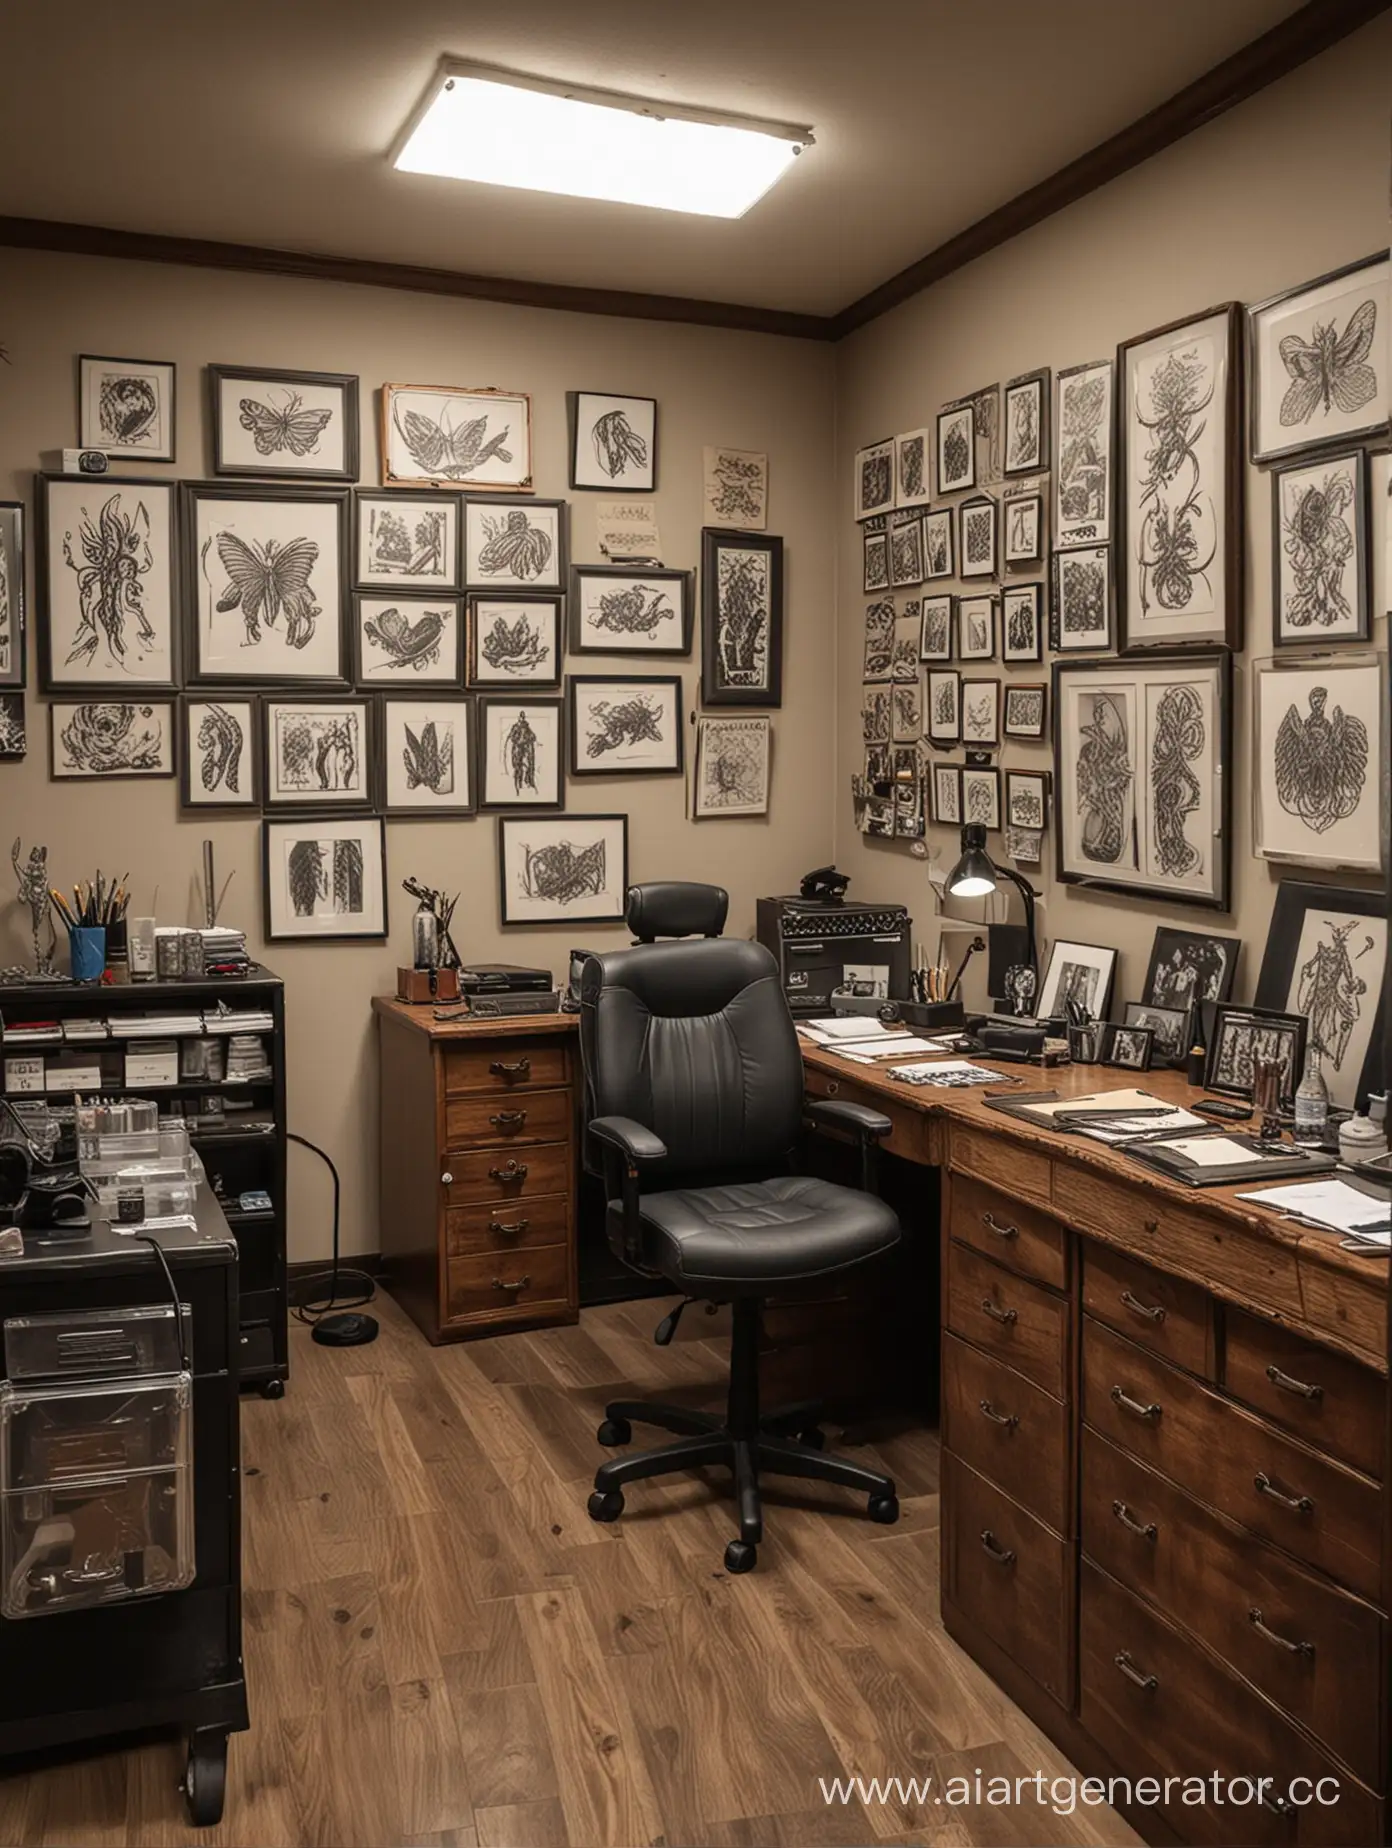 Tattoo-Masters-Office-Room-Intriguing-Interior-of-a-Tattoo-Artists-Creative-Space